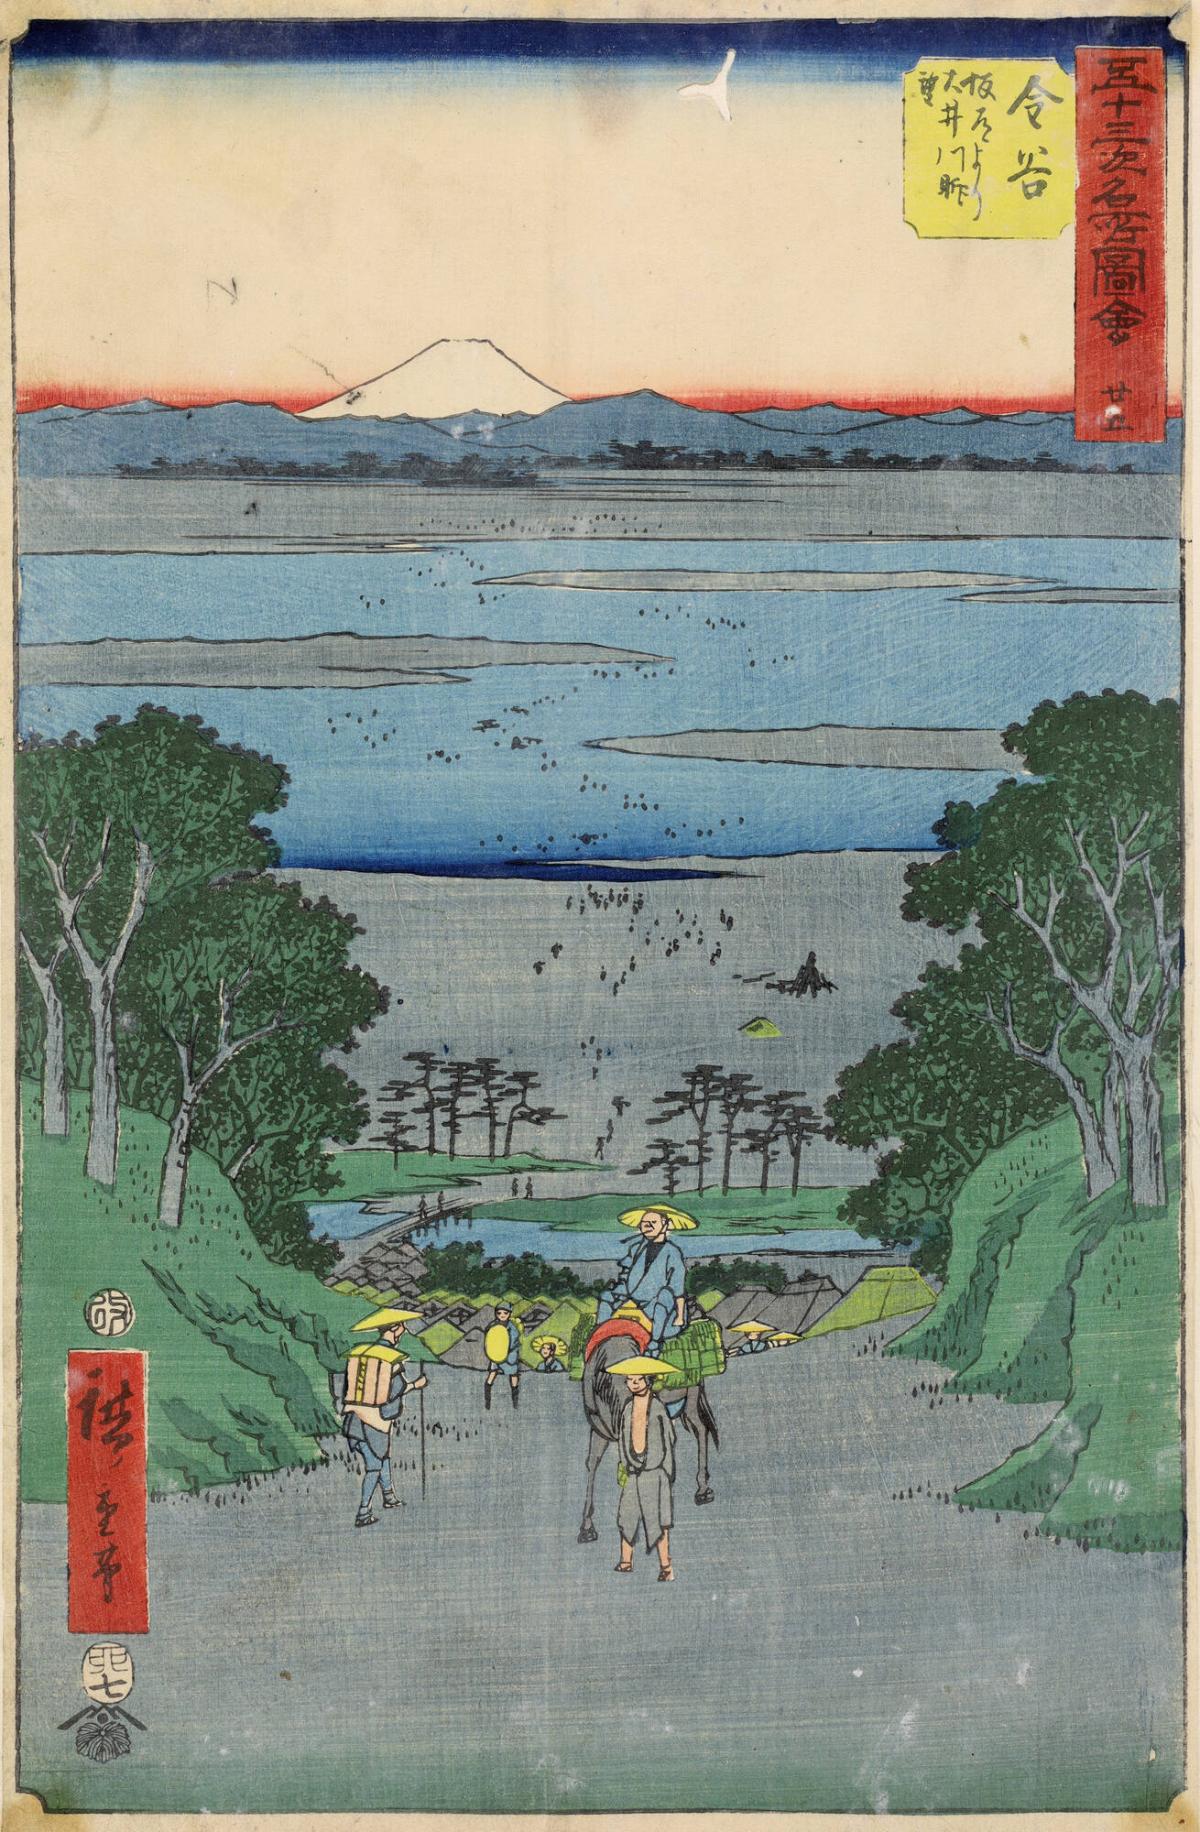 View of the Oi River from the Slope near Kanaya, no. 25 from the series Pictures of Famous Places of the Fifty-three Stations, the Vertical Tōkaidō